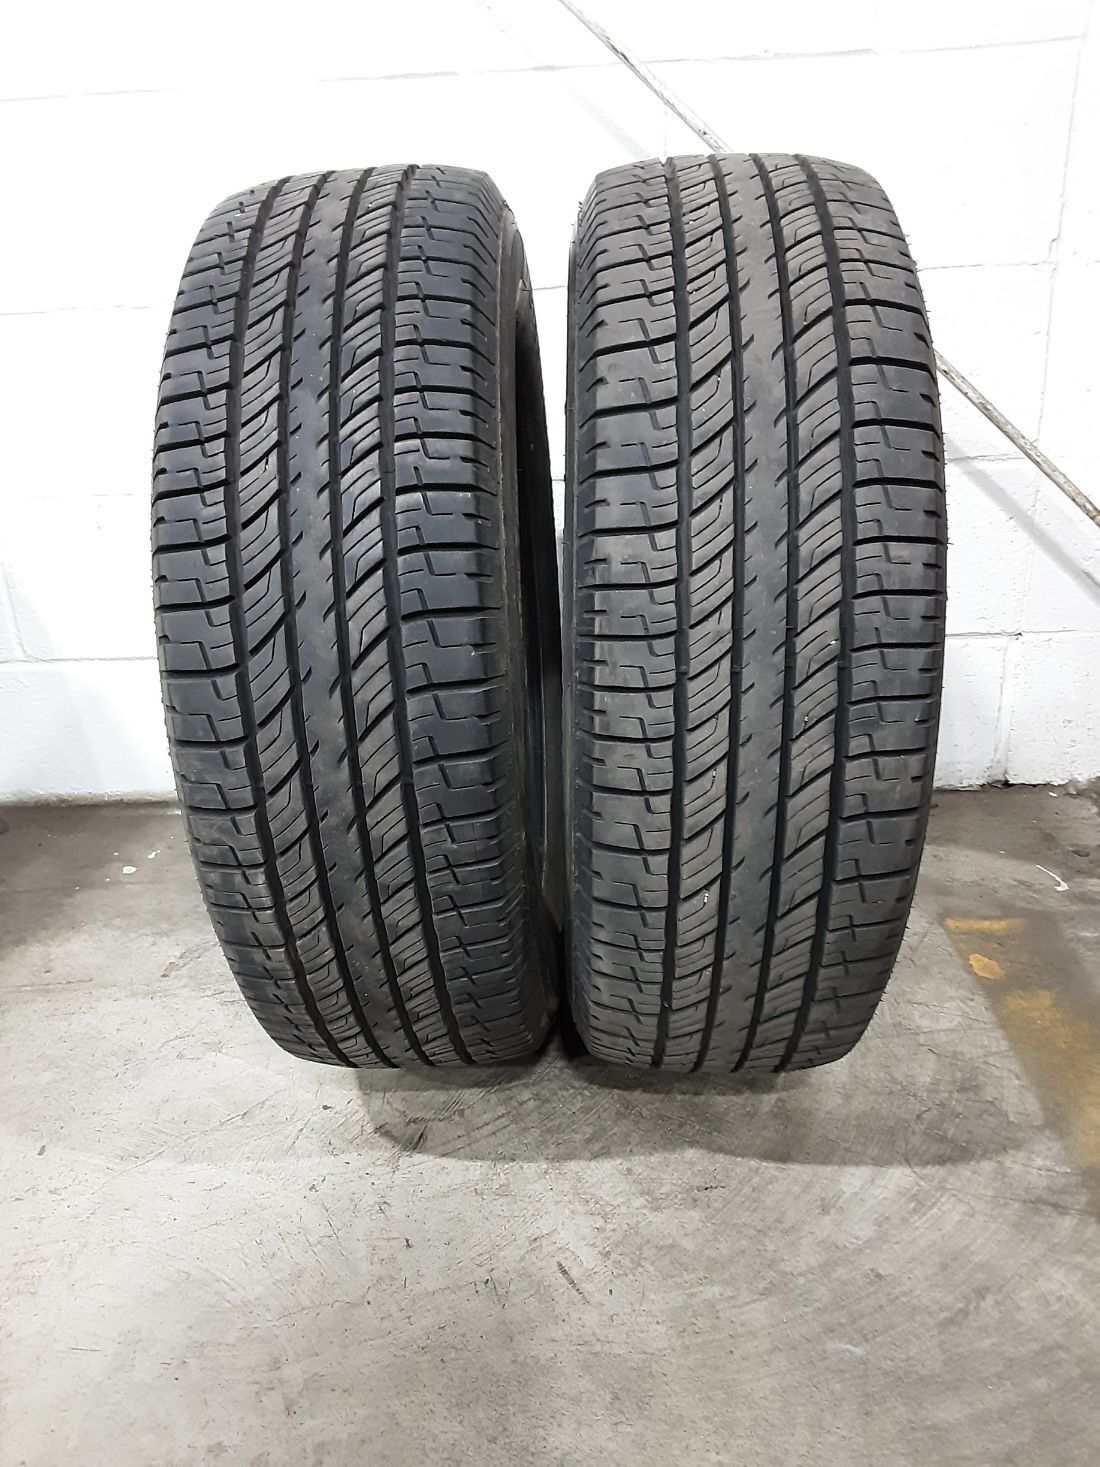 2x P225/65R17 Uniroyal Laredo Cross Country Tour 9-10/32 Used Tires